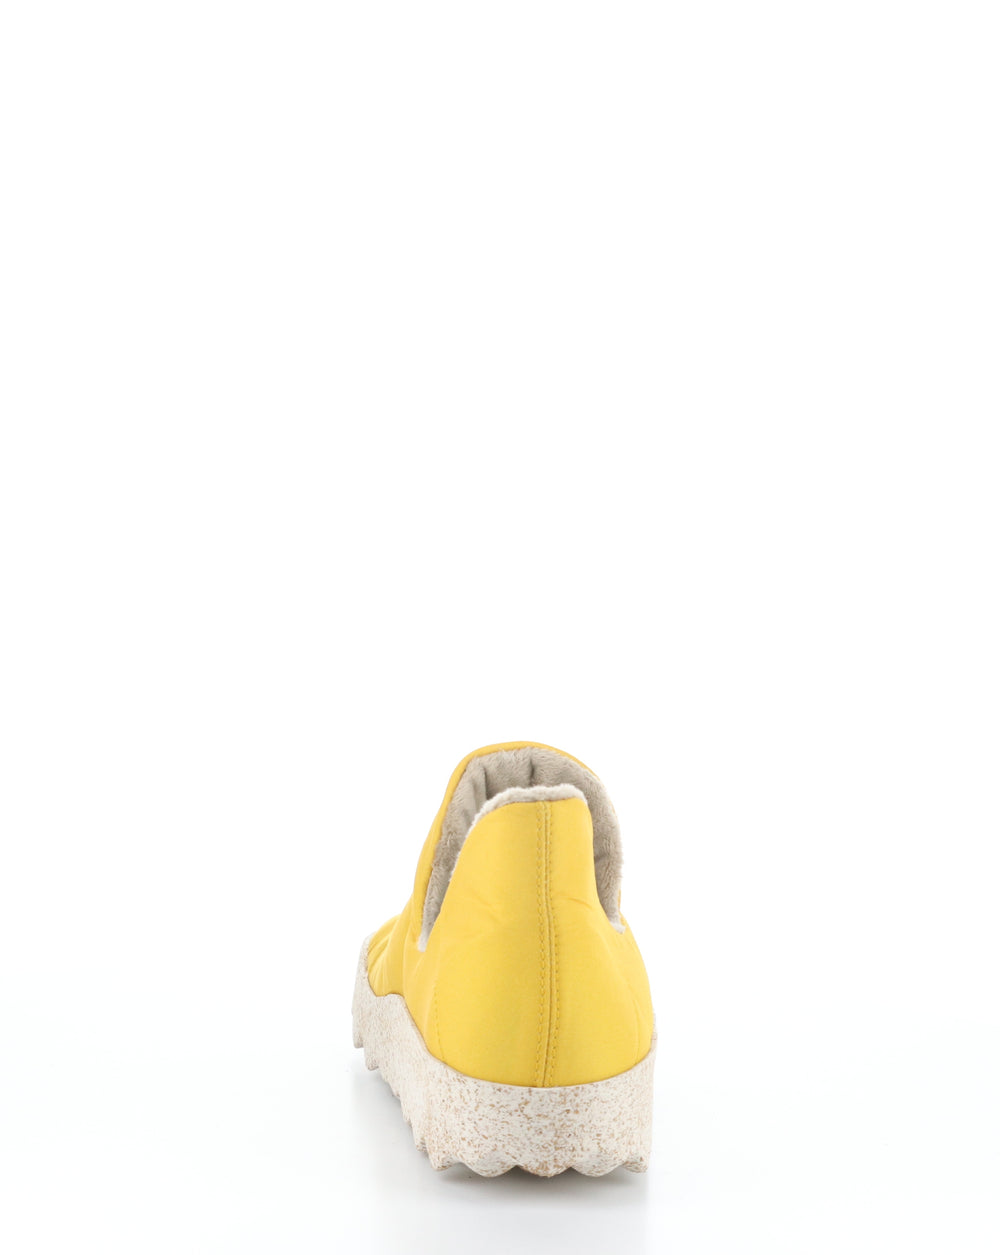 CRUS145ASP Yellow Round Toe Shoes